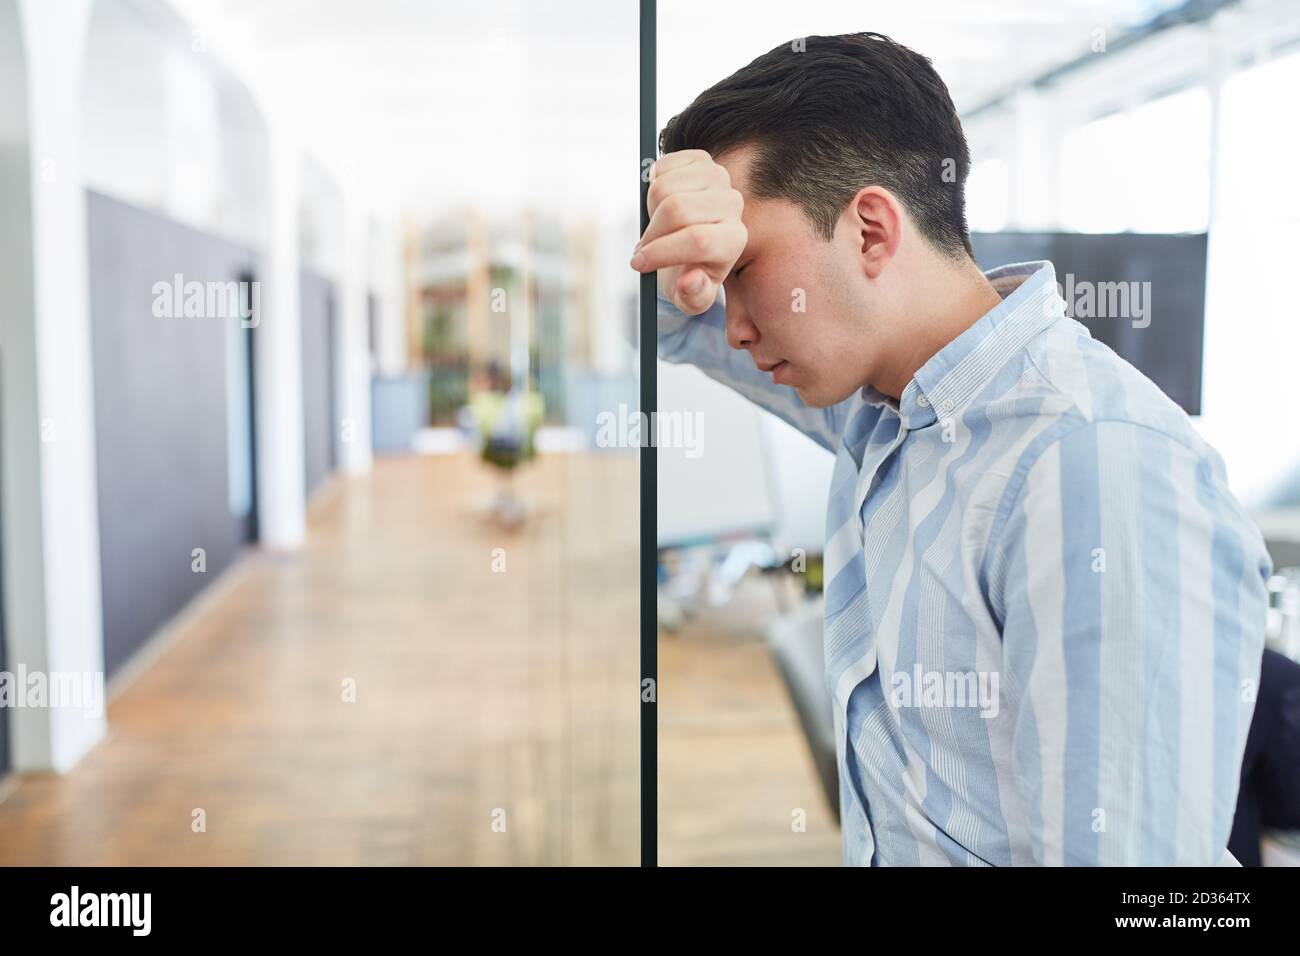 Young business man in office with burnout due to overload leaning against glass wall Stock Photo